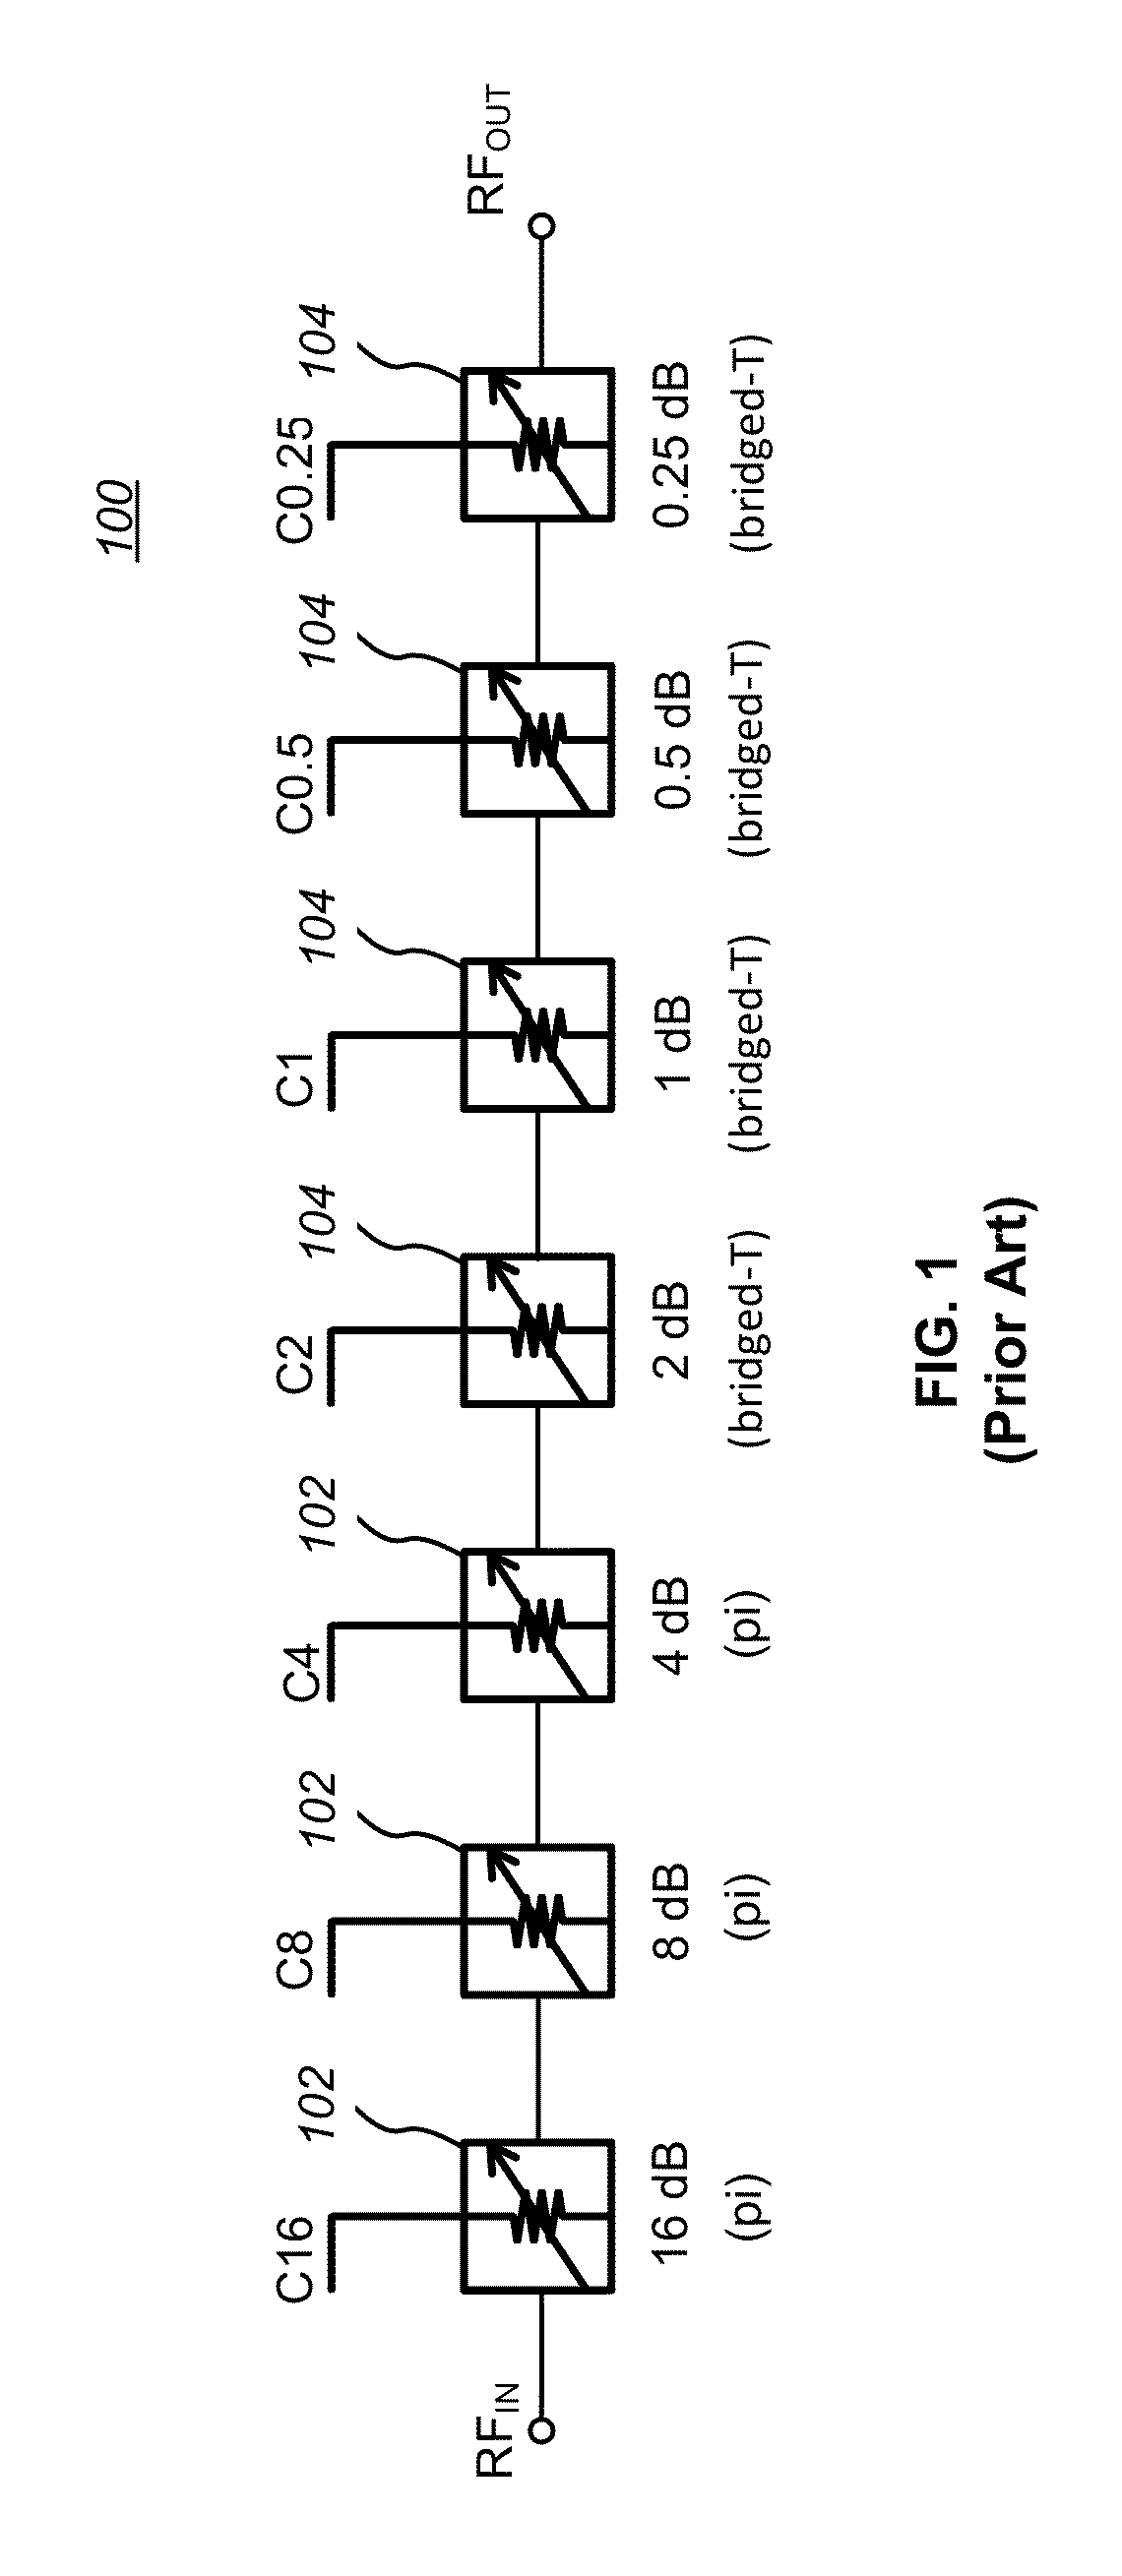 Method and apparatus for preventing digital step attenuator output power peaking during attenuation state transitions